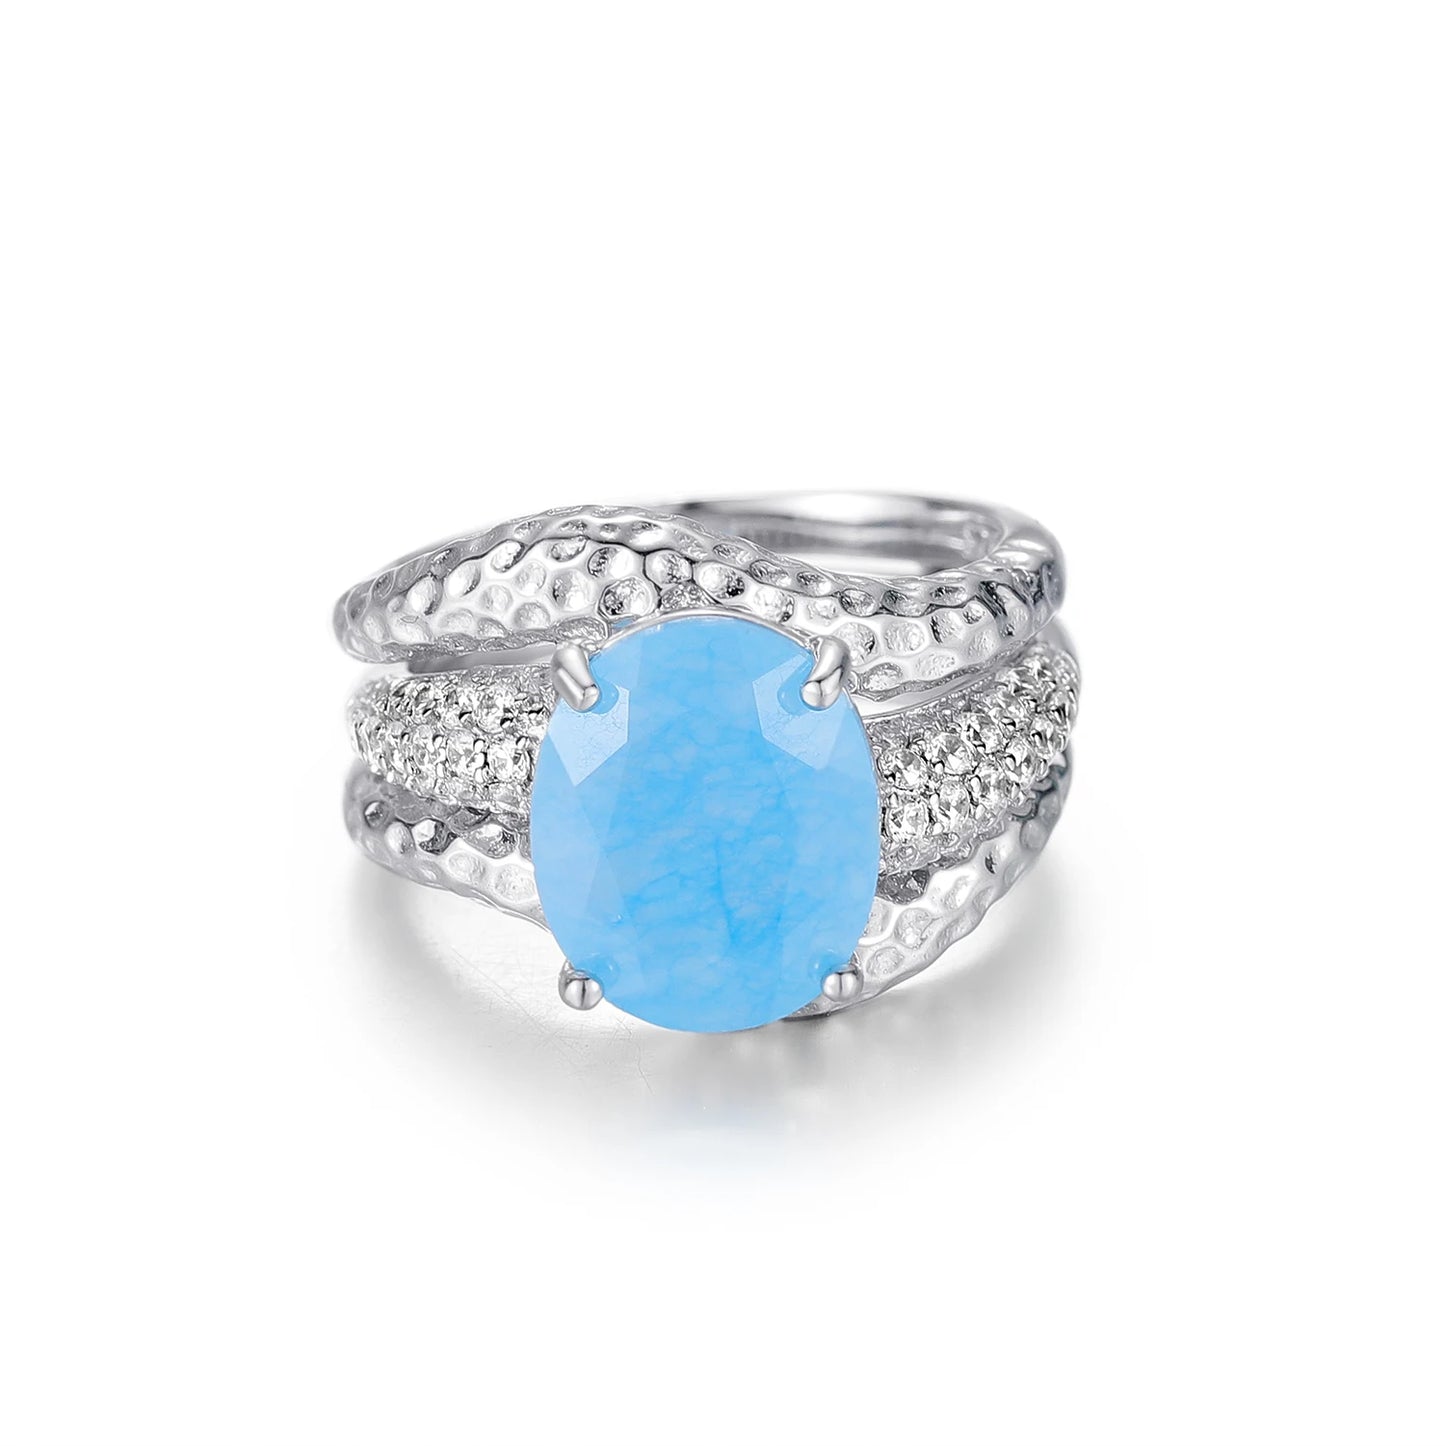 GEM'S BALLE Aqua-blue Calcedony Gemstone Cocktail Ring 925 Sterling Silver Handmade Jacket Rings For Women Fine Jewelry Aqua-blue Calcedony CHINA